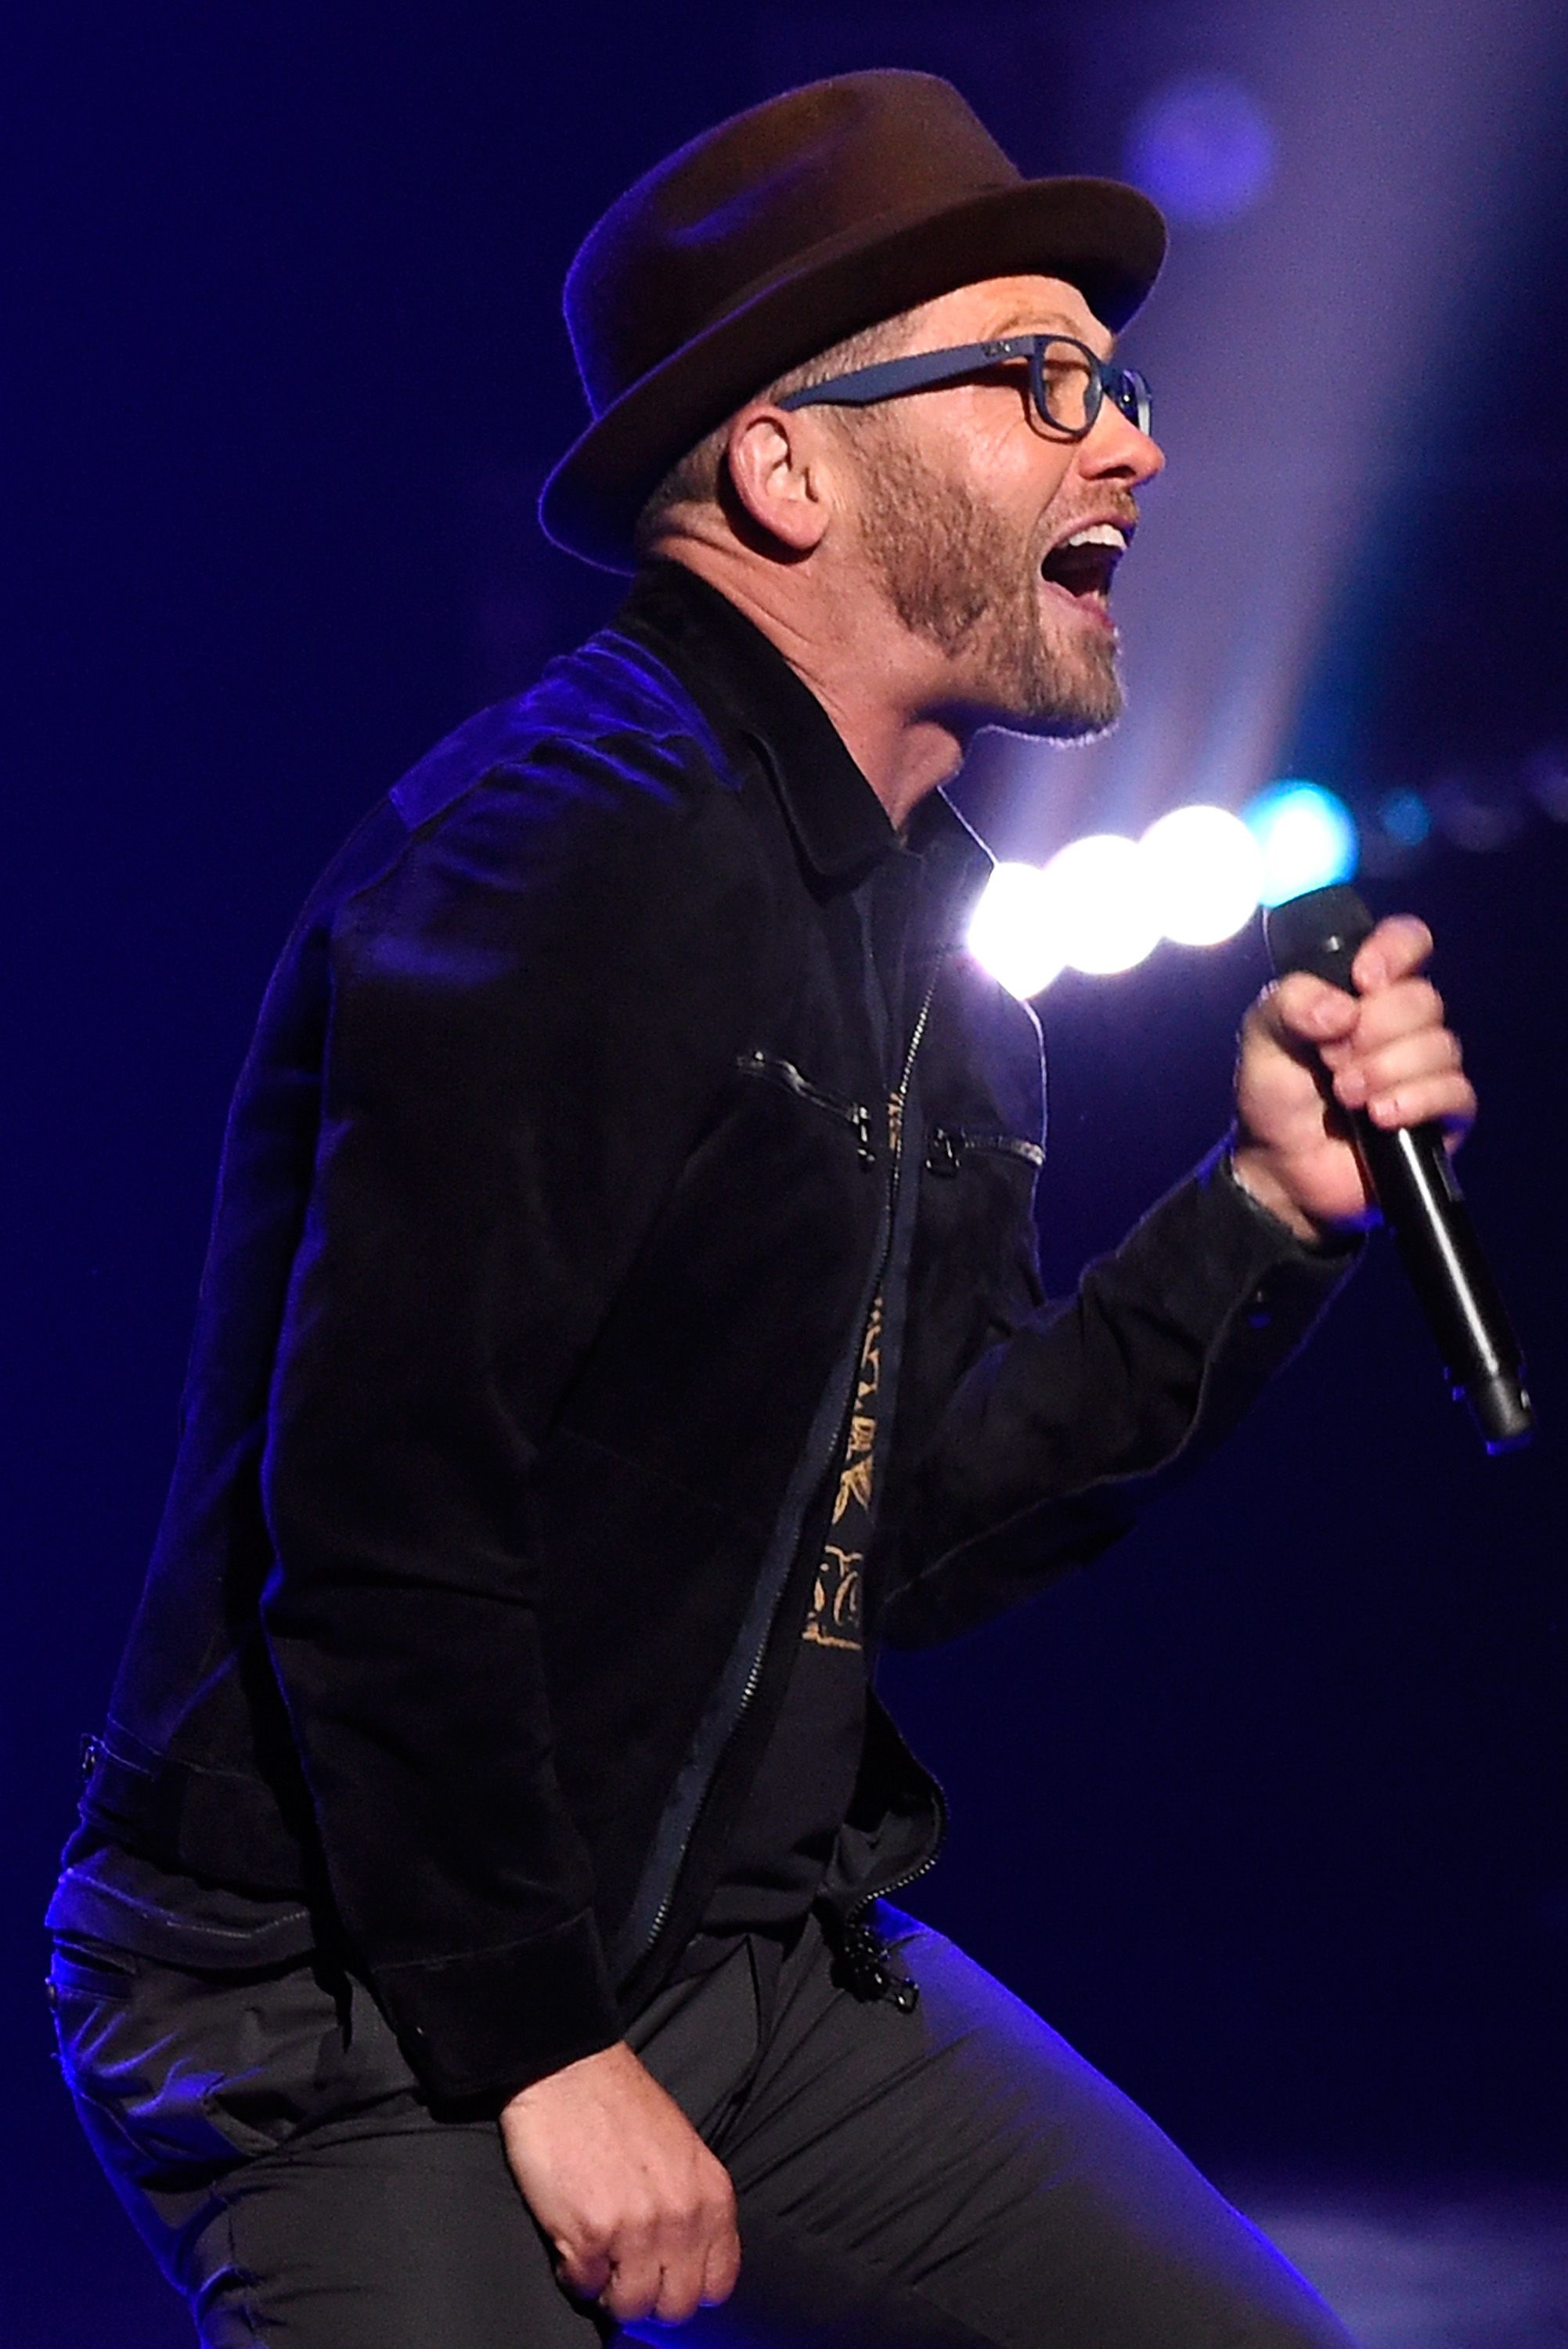 TobyMac Talks Candidly on 'Good Morning America' About His Son's